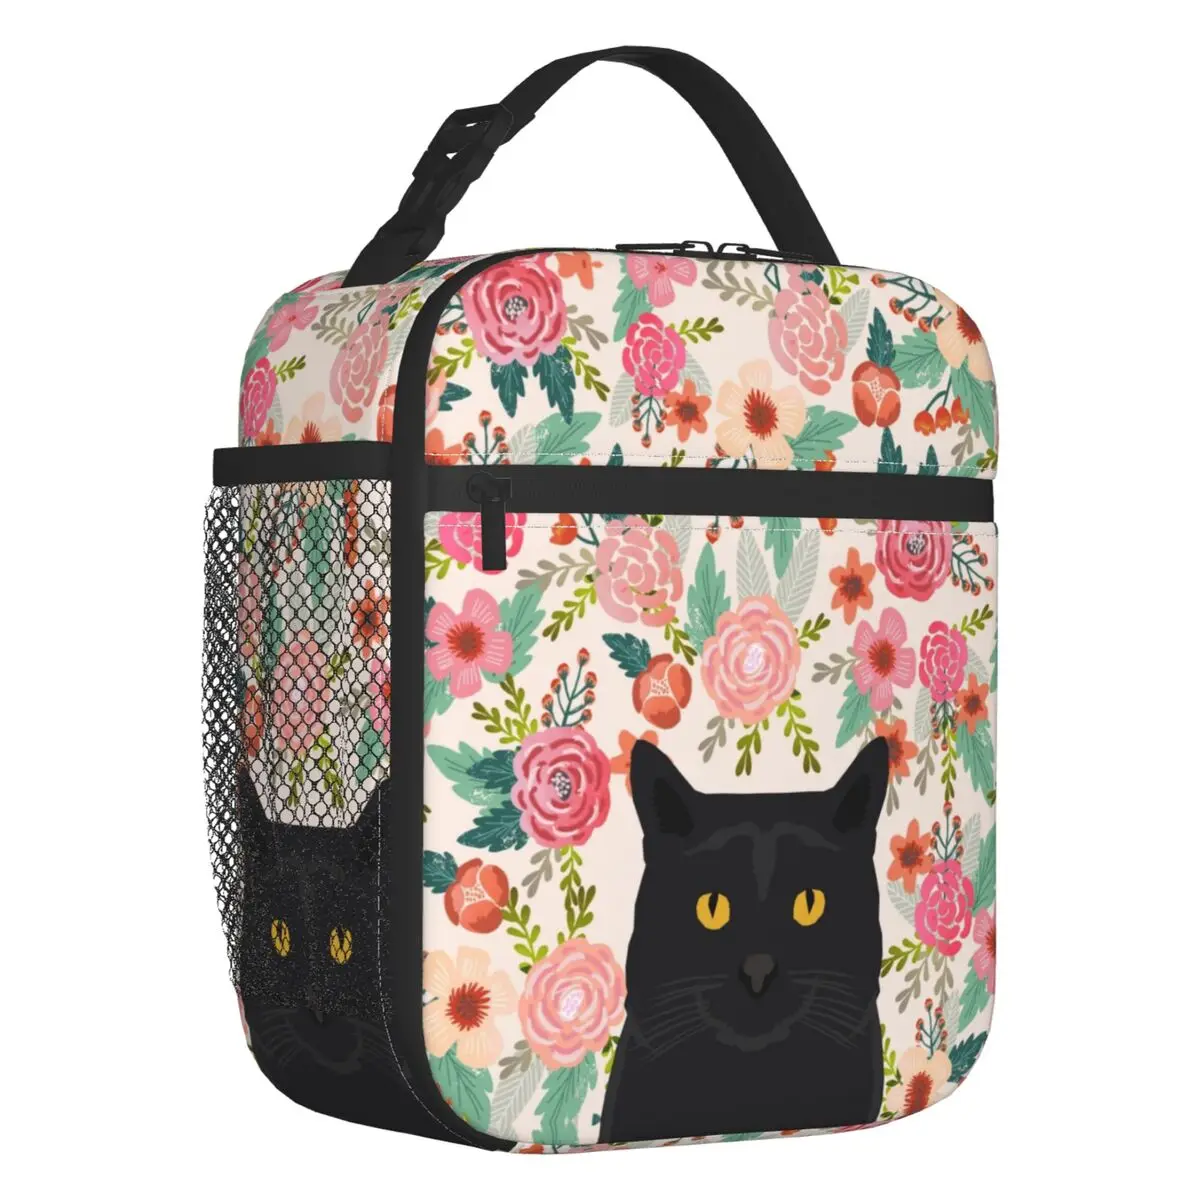 Black Cat Breed Floral Pattern Lunch Box Waterproof Background Pet Kitten Thermal Cooler Food Insulated Lunch Bag School Student